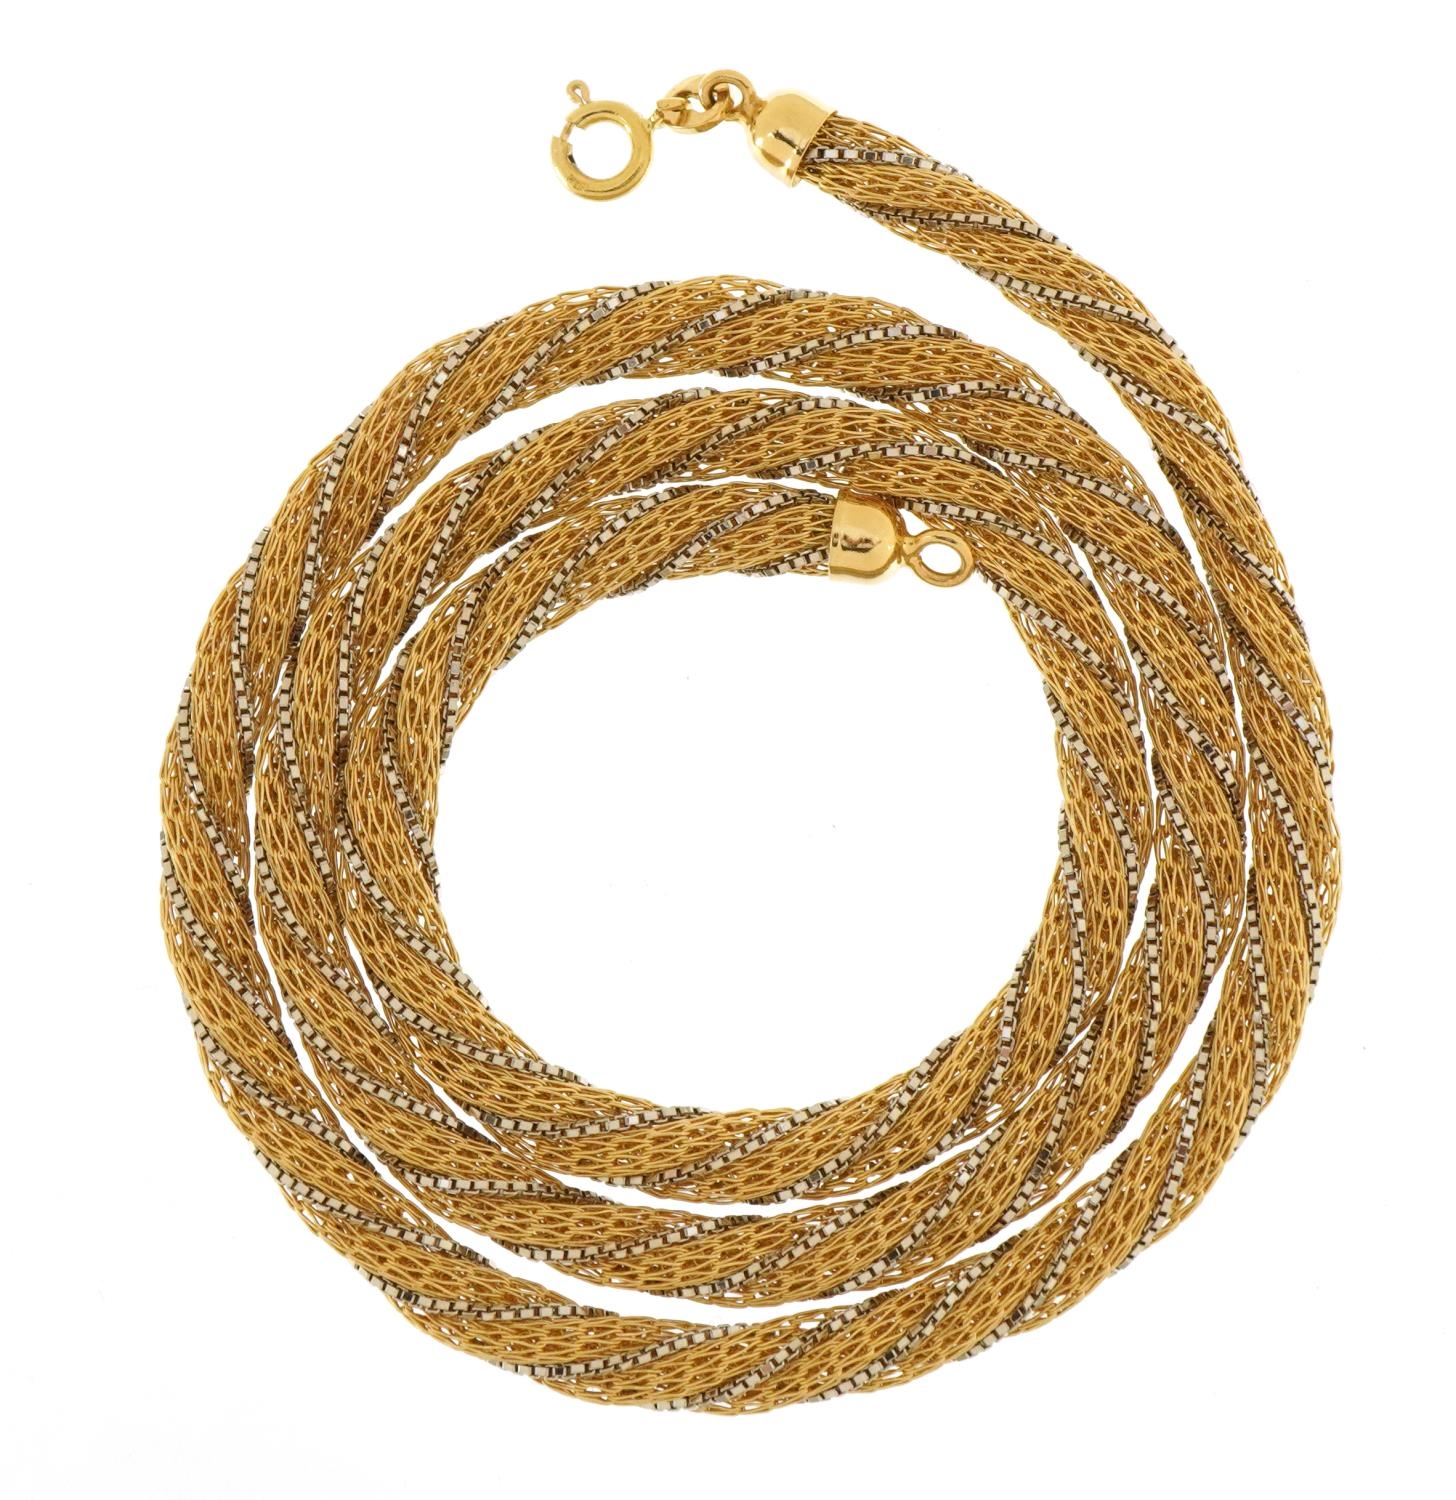 18ct two tone gold rope twist necklace with 1980s insurance valuation, 61cm in length, 41.9g - Image 2 of 6